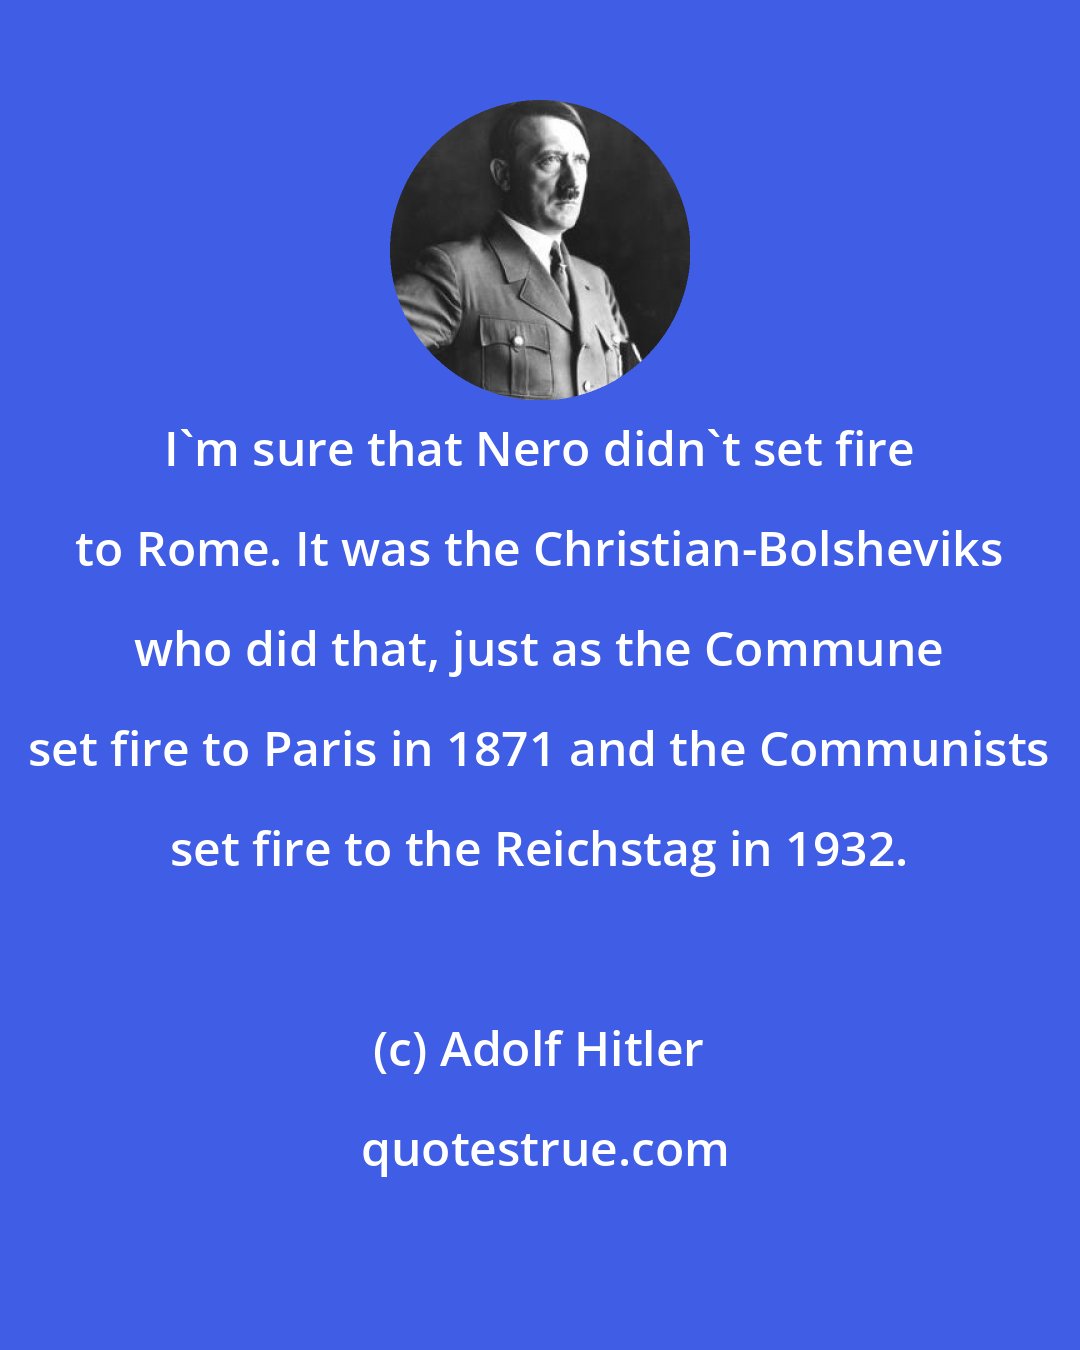 Adolf Hitler: I'm sure that Nero didn't set fire to Rome. It was the Christian-Bolsheviks who did that, just as the Commune set fire to Paris in 1871 and the Communists set fire to the Reichstag in 1932.